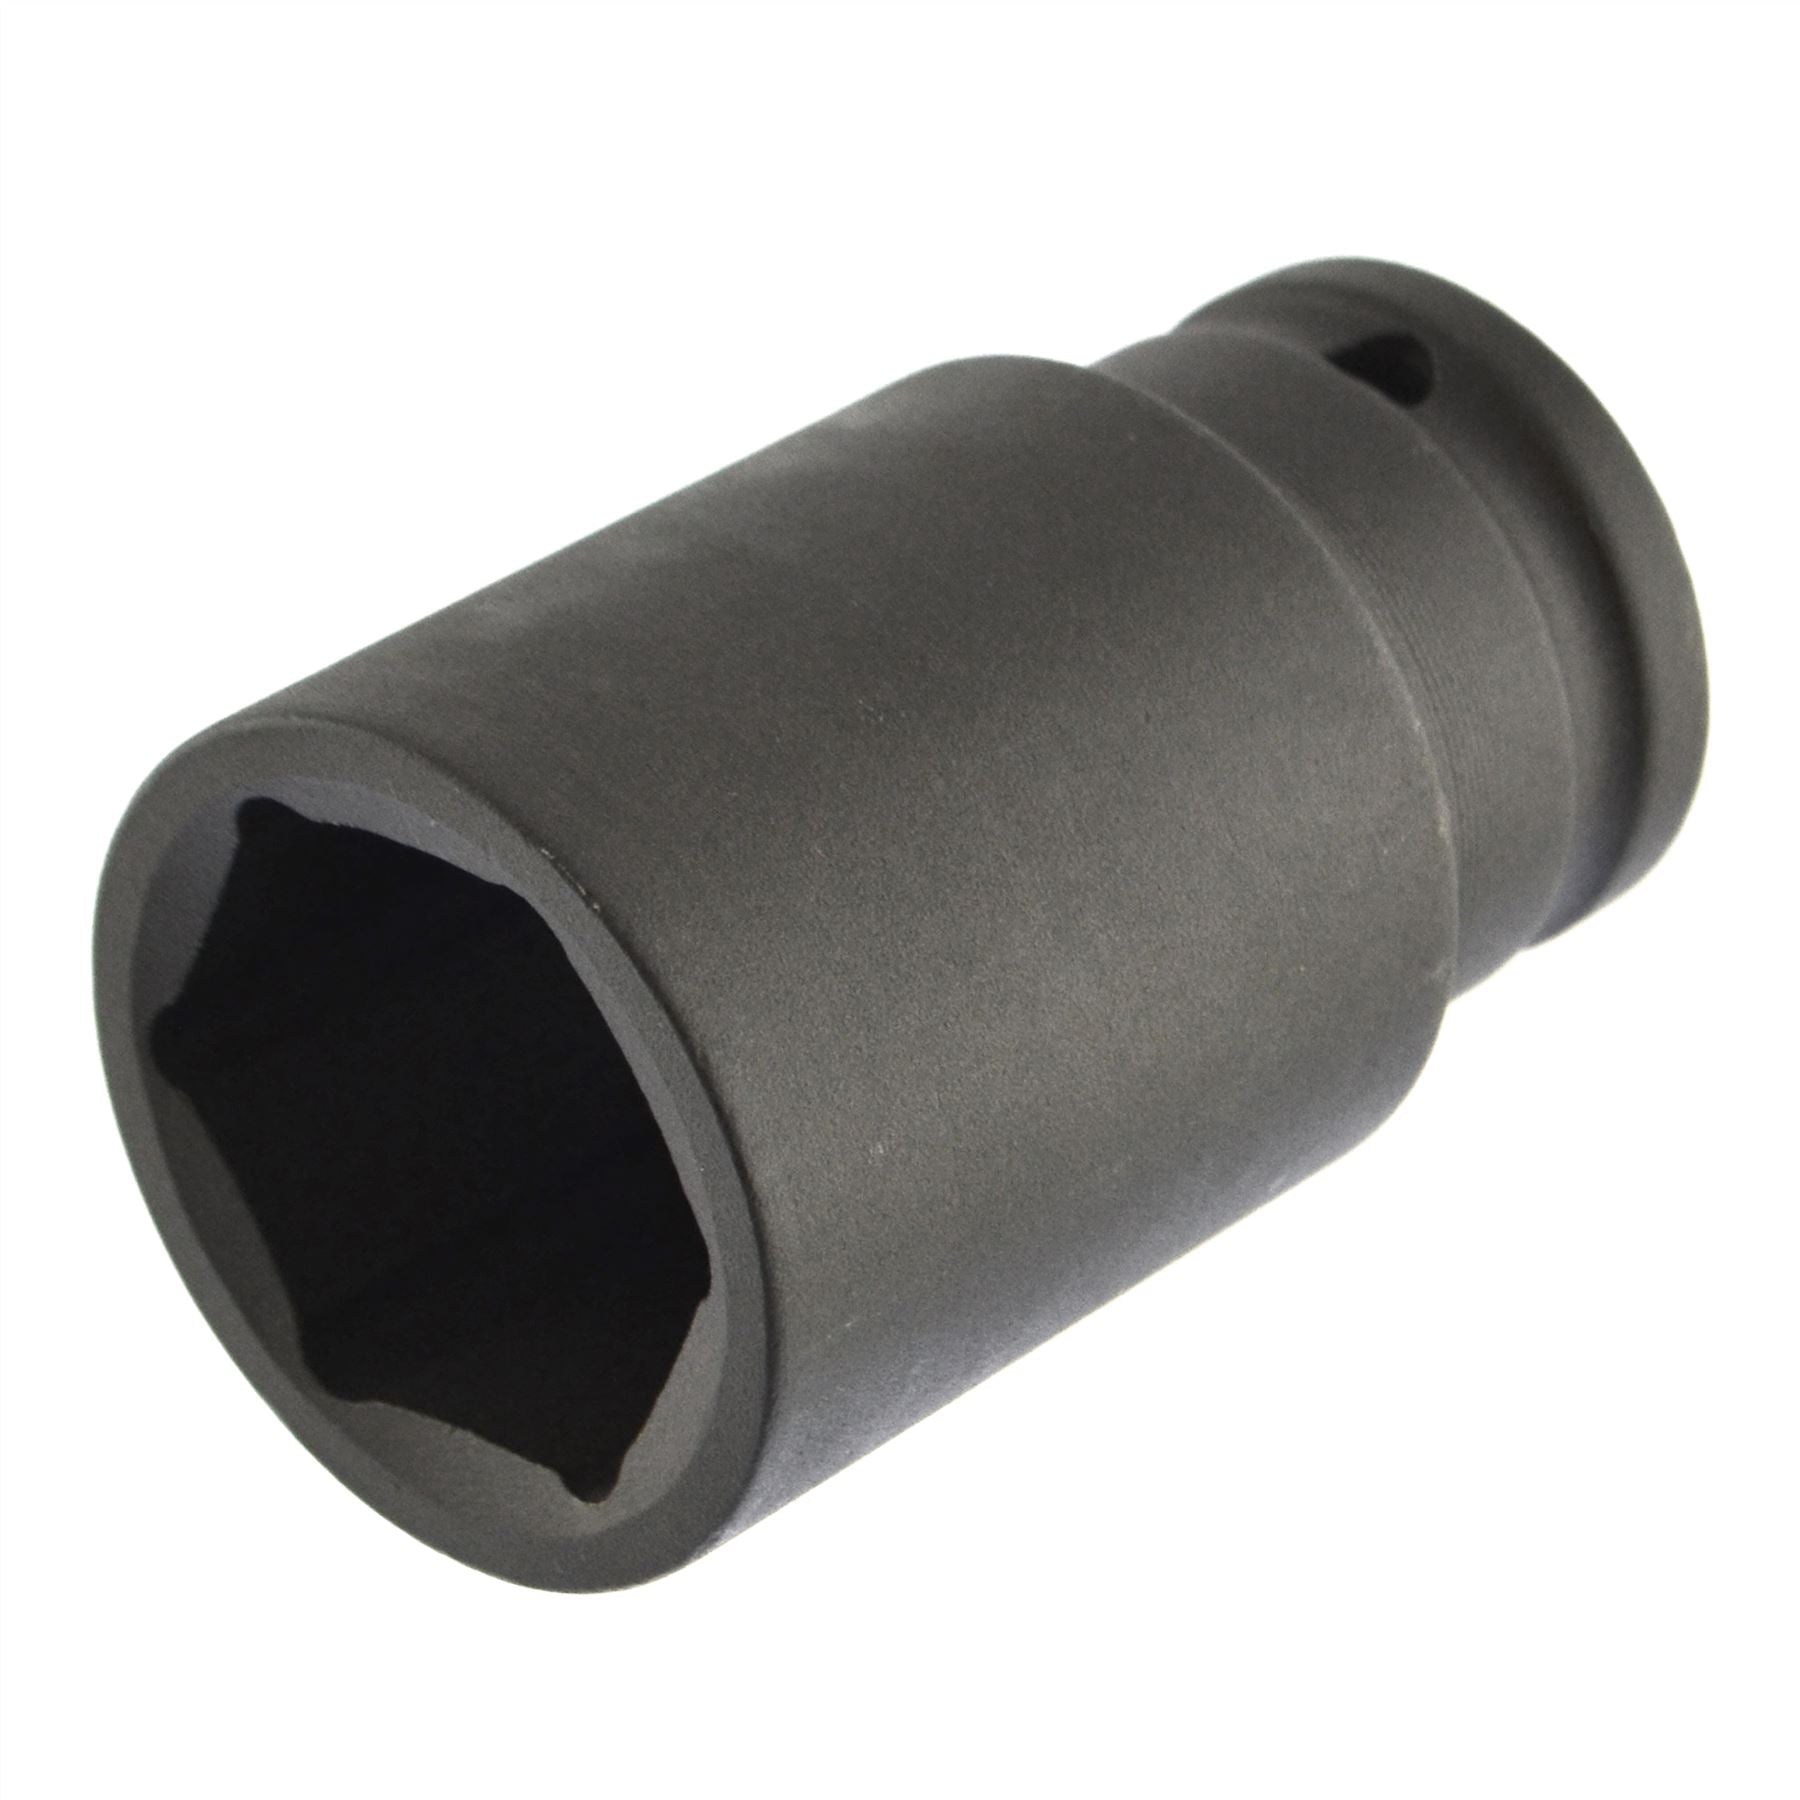 33mm Metric 3/4 Drive Double Deep Impact Socket 6 Sided Single Hex Thick Walled